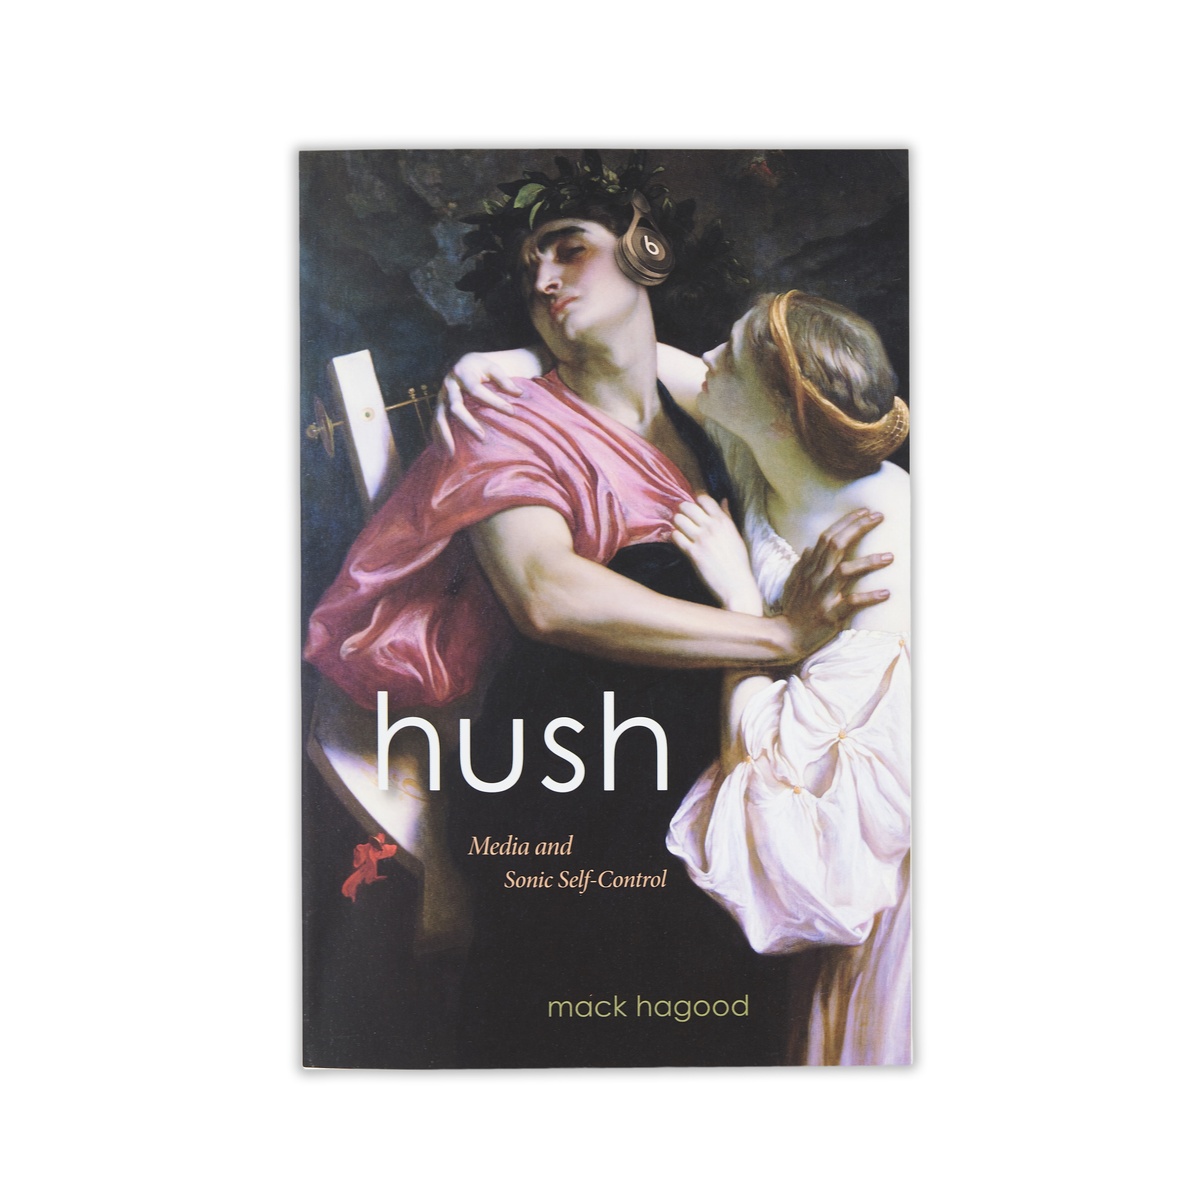 A photograph of the cover of Mack Hagood's book 'Hush: Media and Sonic Self-Control'.
